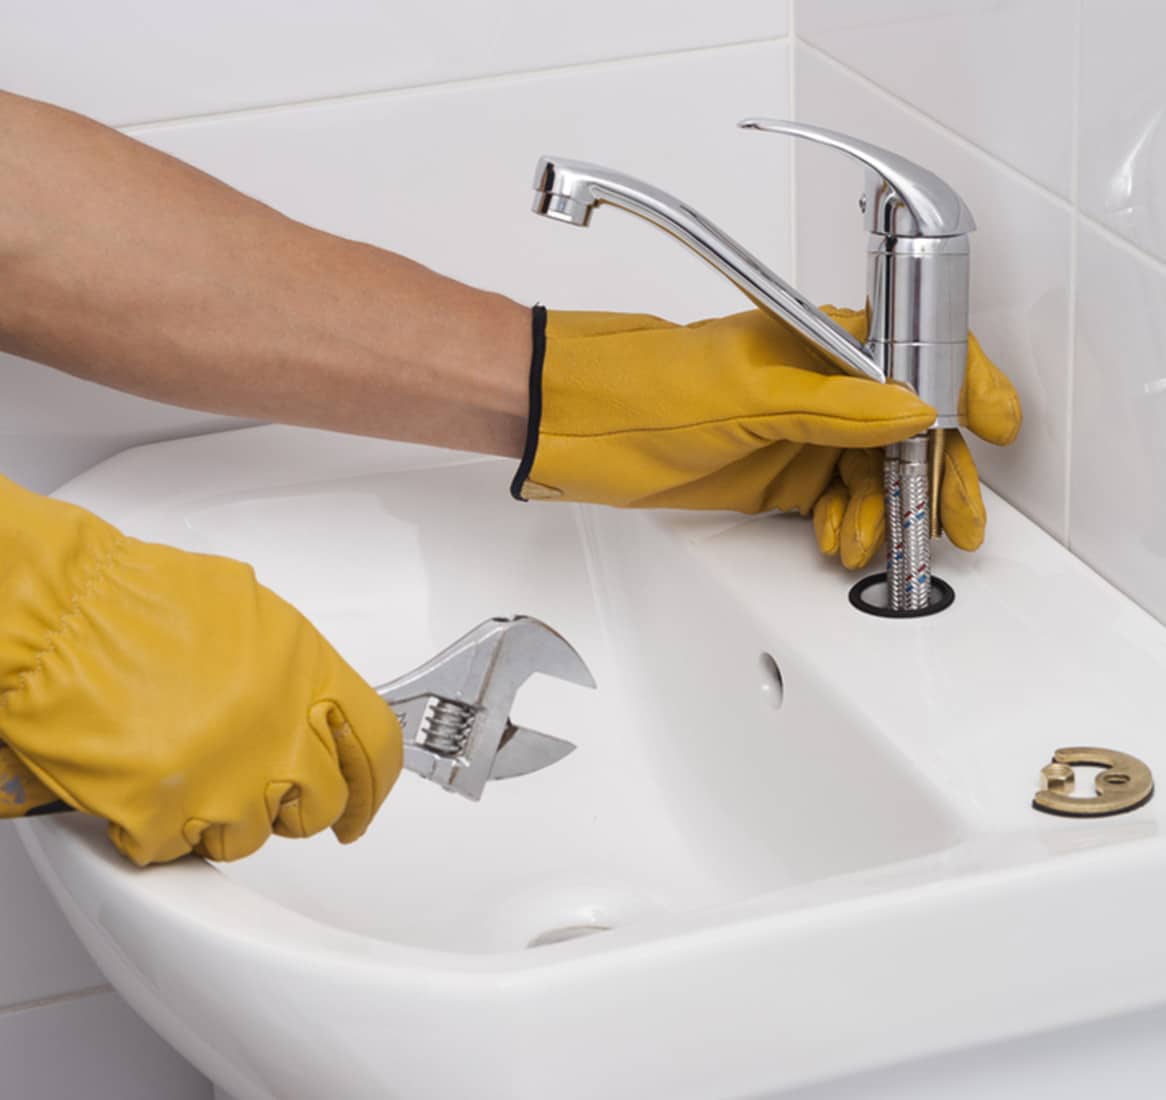 Plumber Installs a New Faucet for a Sink - Emergency Plumbing Services In Lithgow, NSW